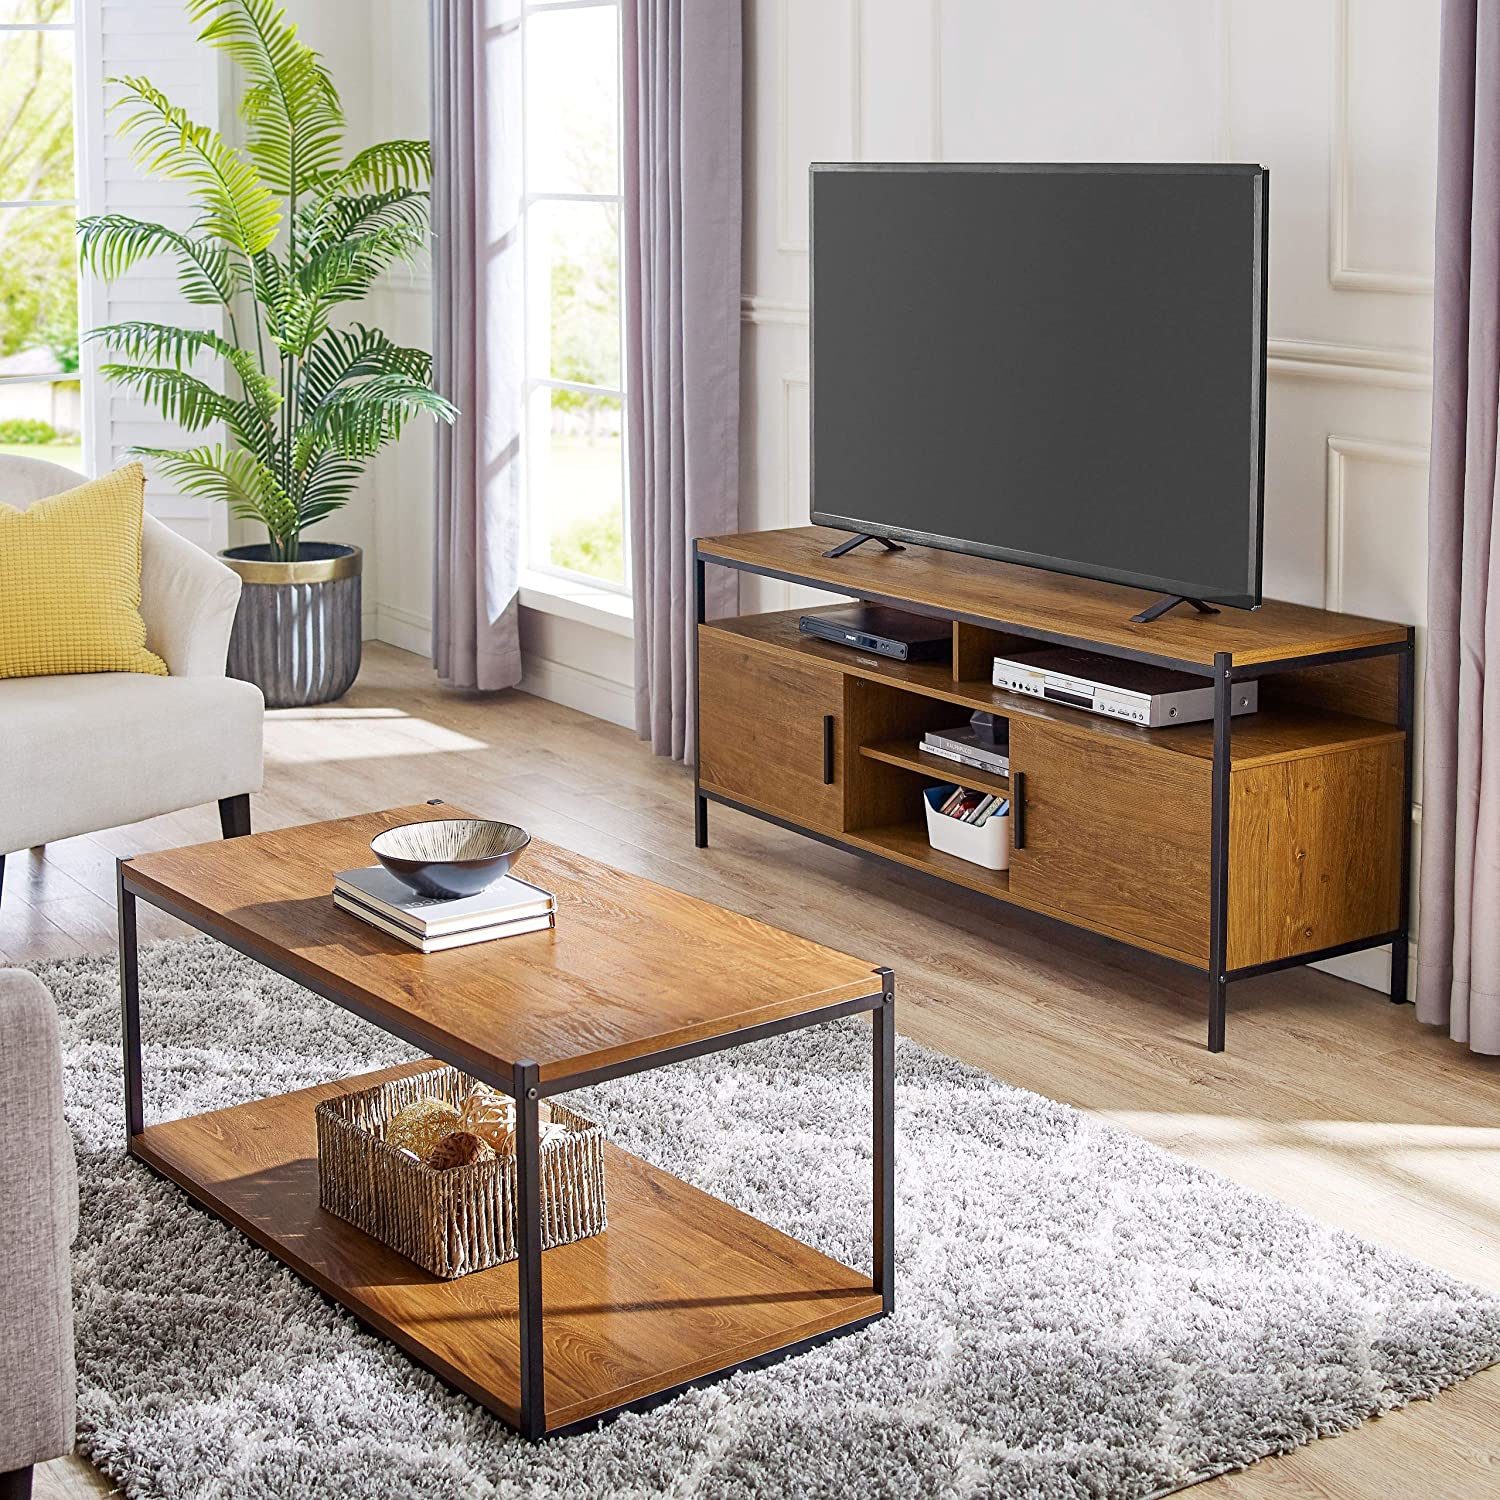 Industrial Style Iron and Wood TV Stand with Minimal Decor